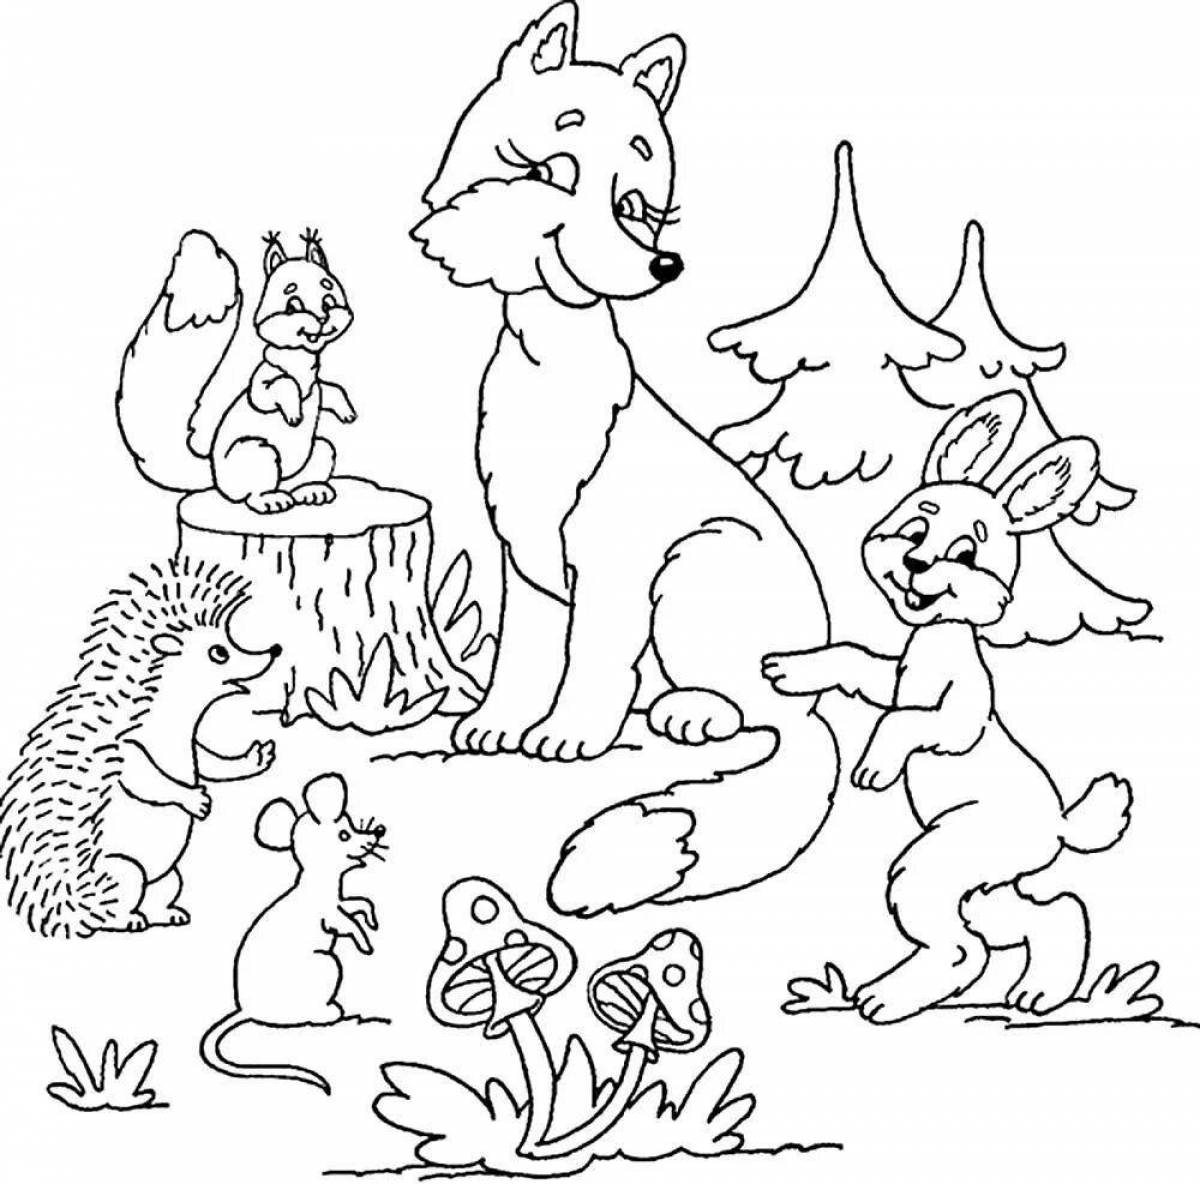 Coloring forest animals color-explosion for preschoolers